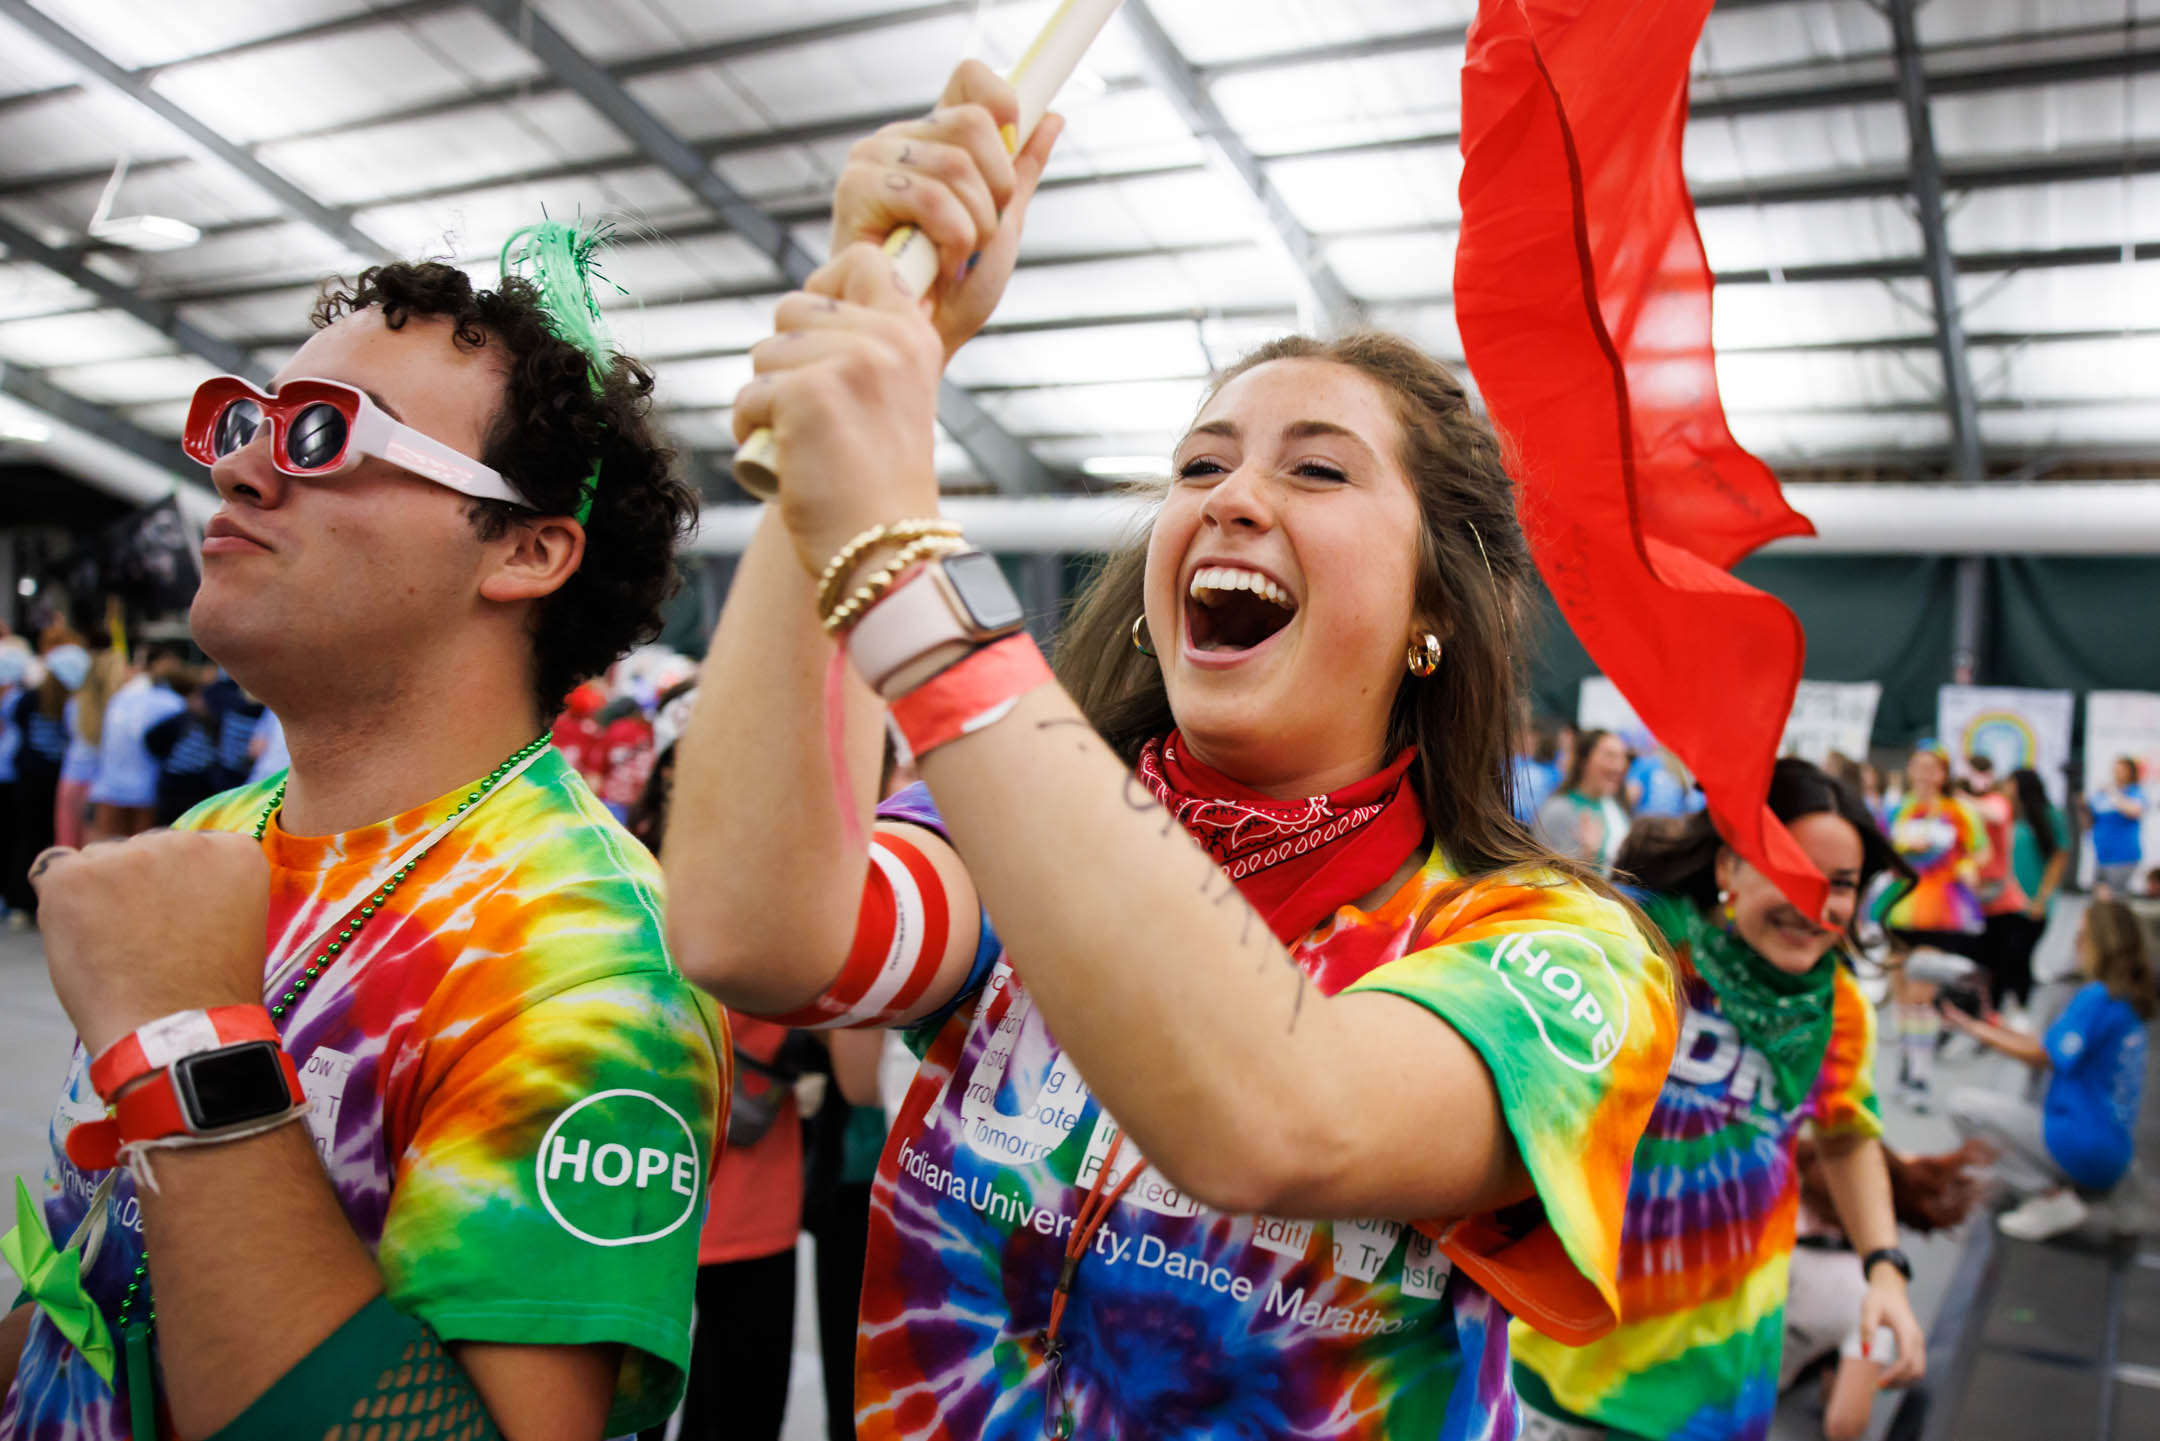 Morale committee members run through the crowd before the opening ceremony of the Indiana University Dance Marathon in the IU Tennis Center on Friday, Oct. 28, 2022. (James Brosher/Indiana University)